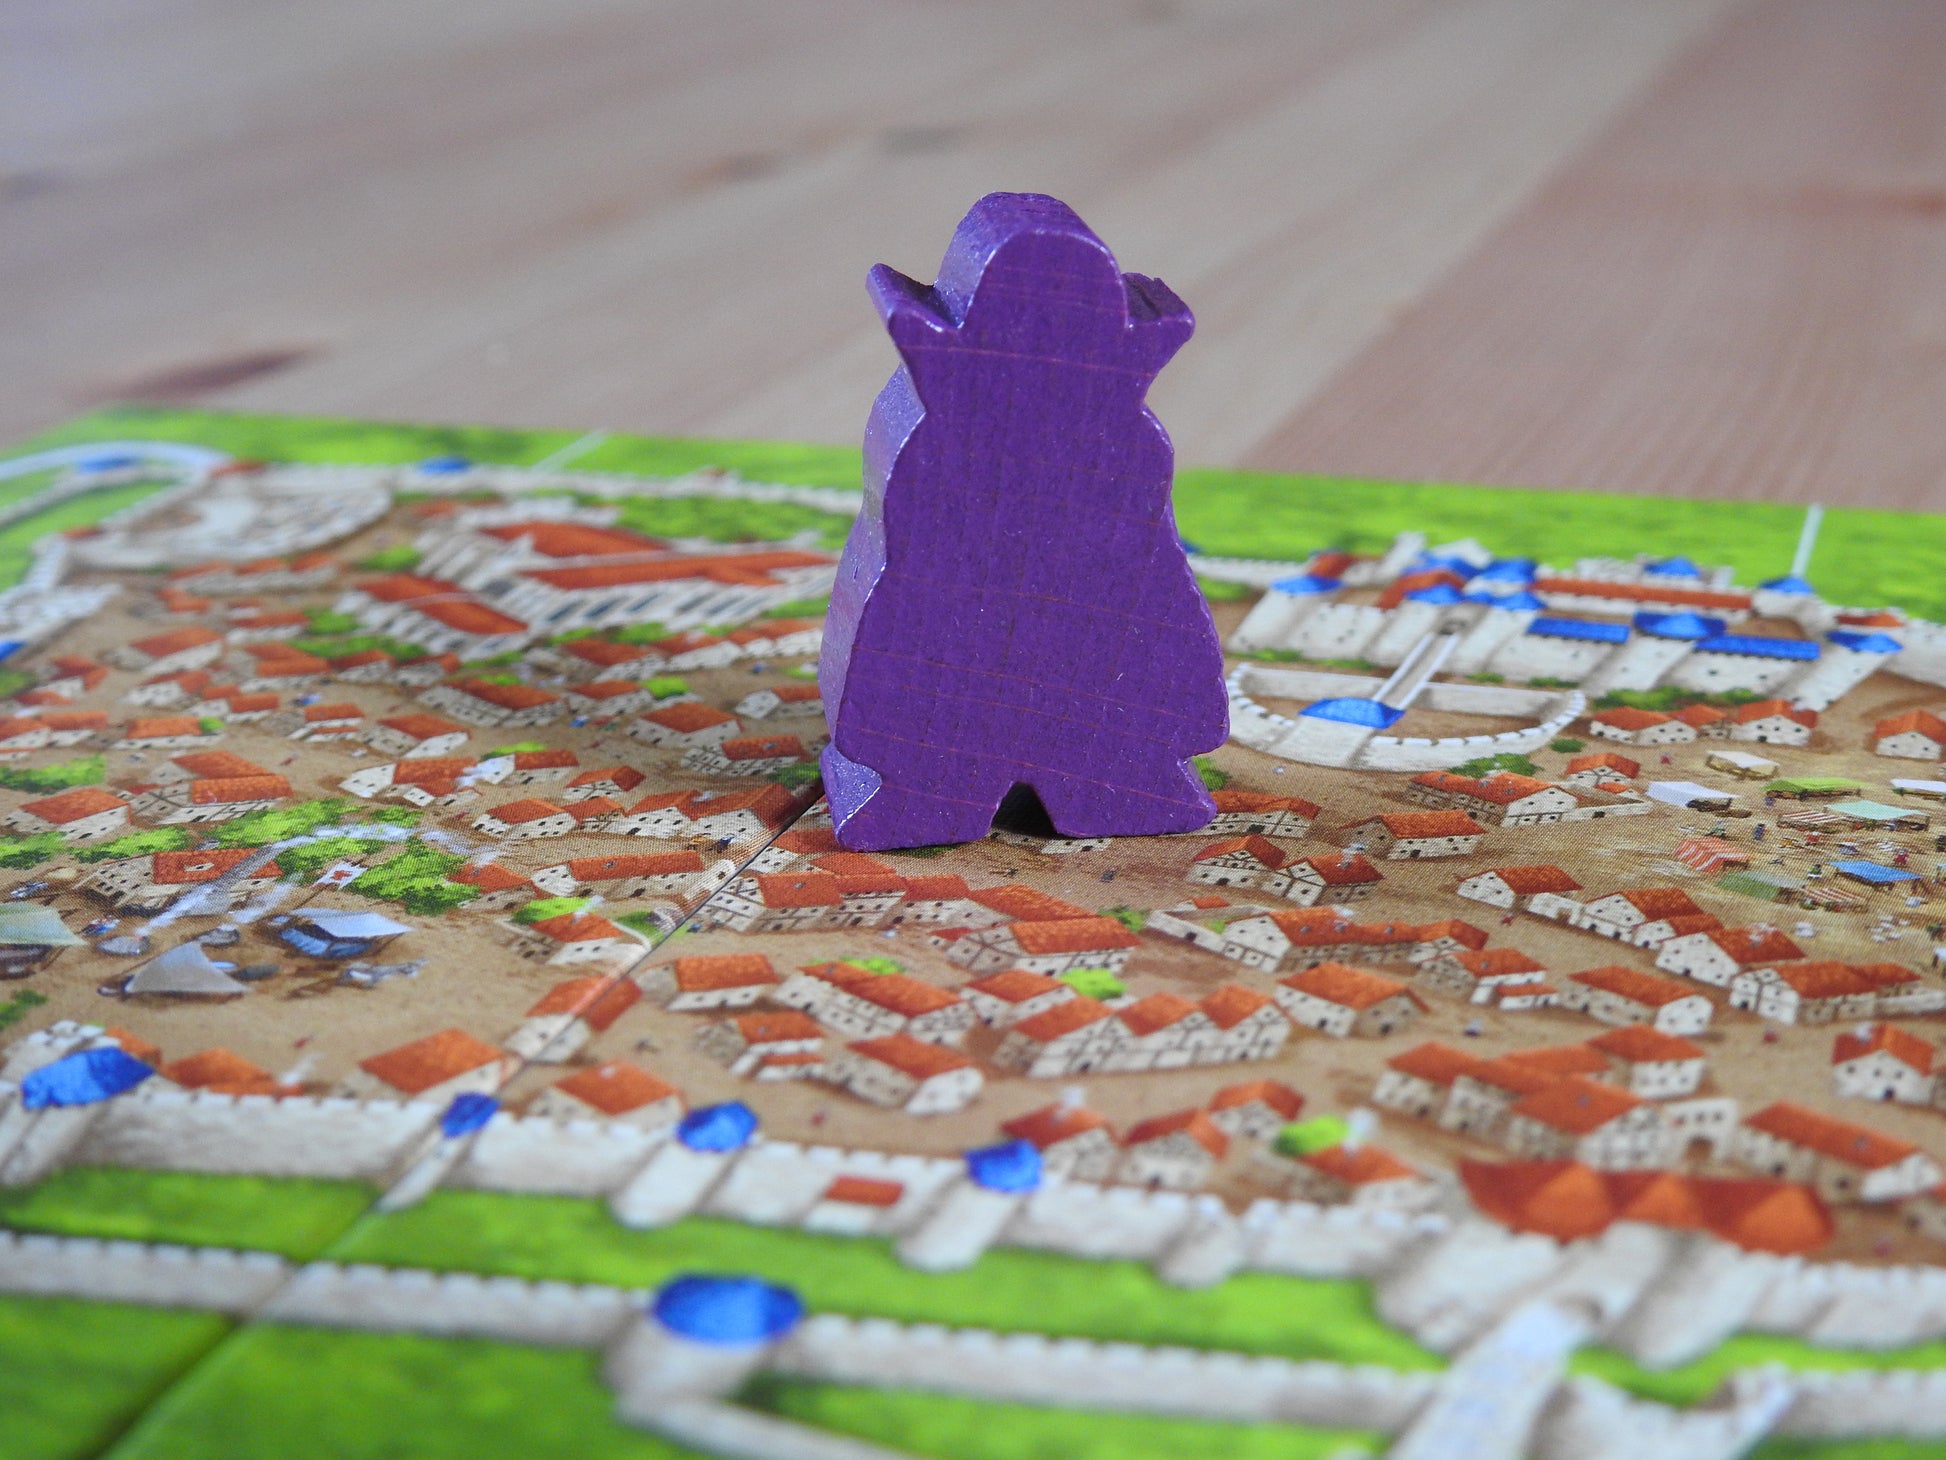 Close-up view of the brooding Count meeple figure as he stalks the streets of the city of Carcassonne. Scary!